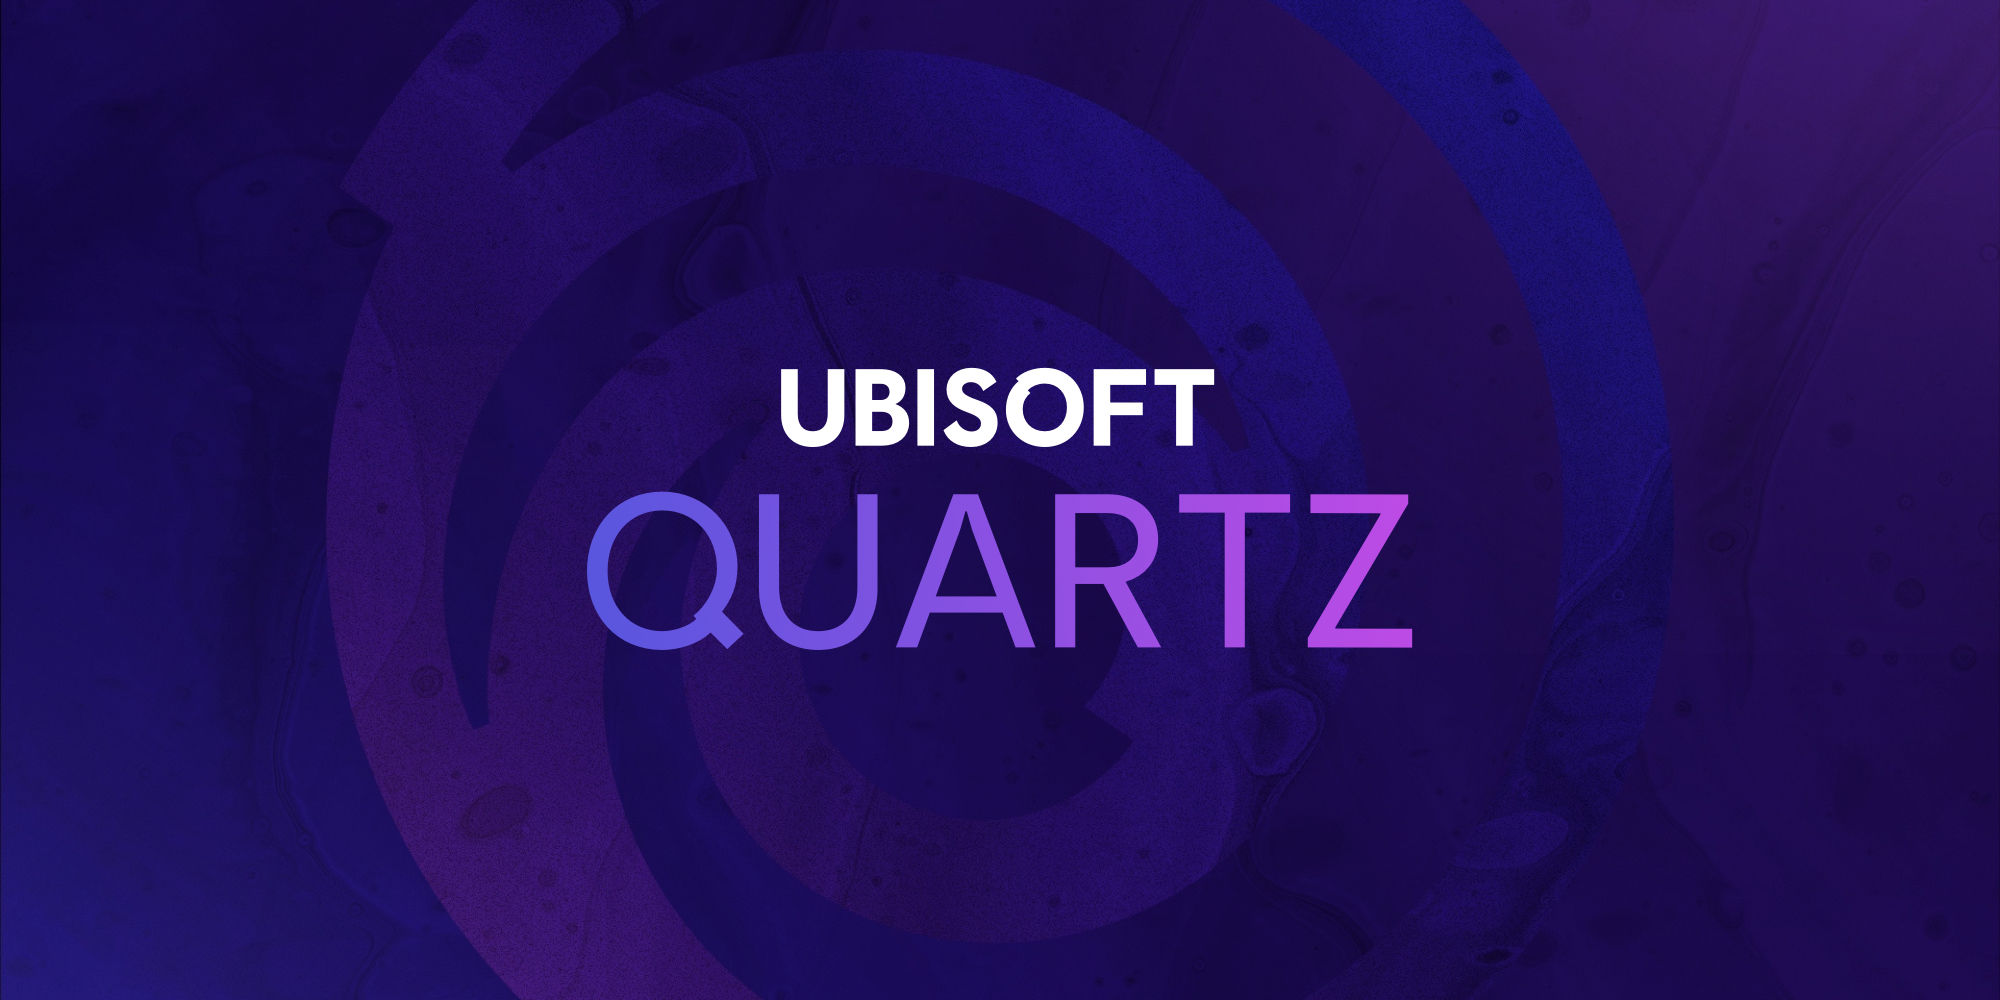 All You Need to Know About Ubisoft Quartz